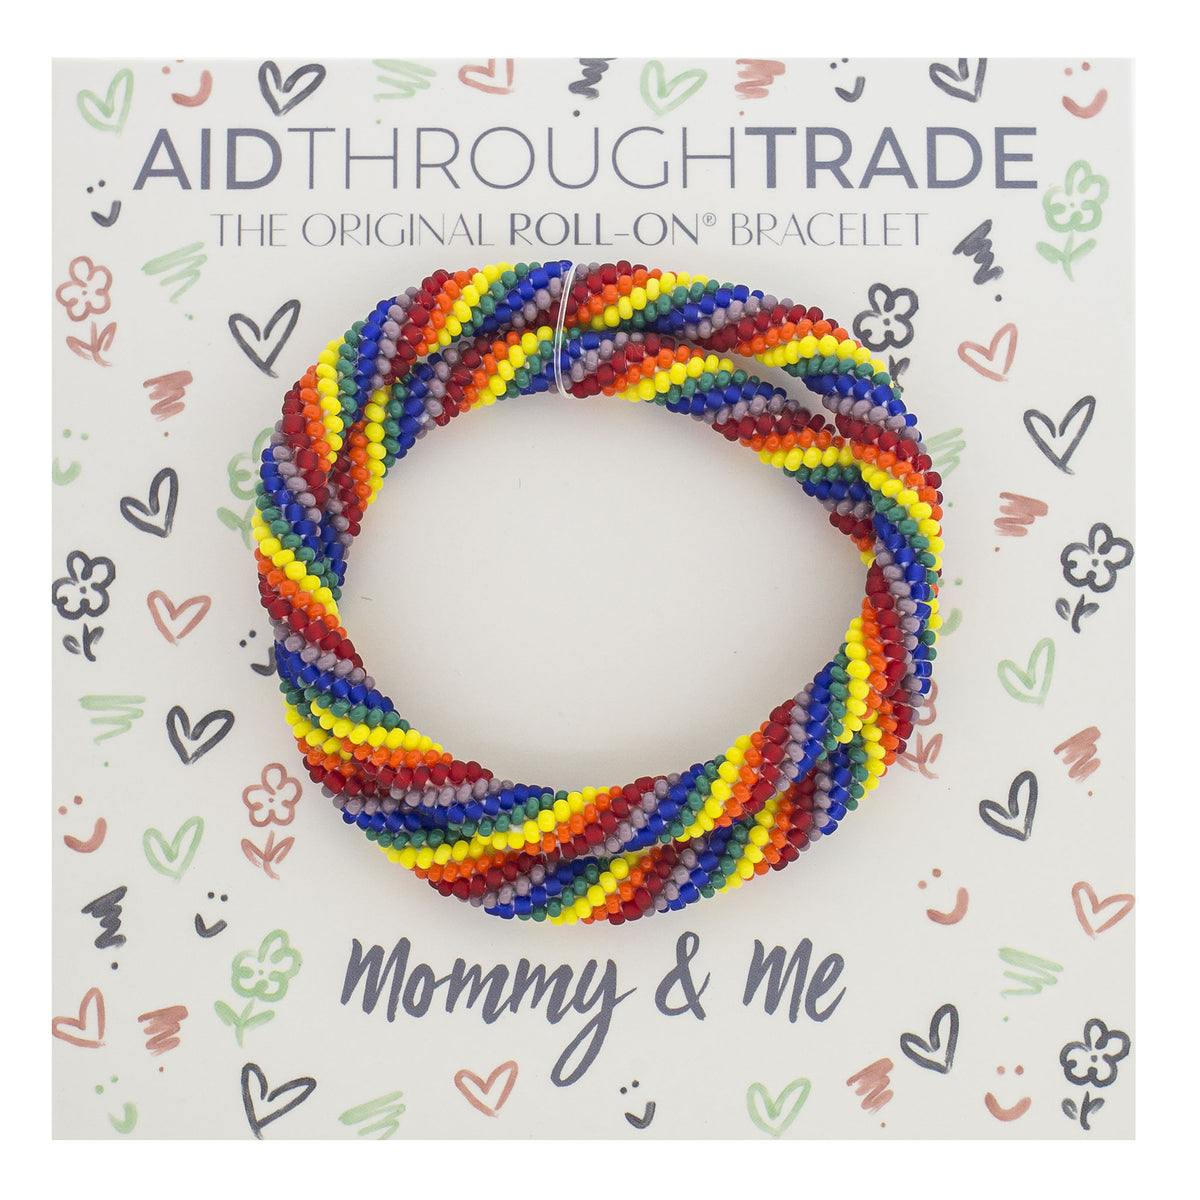 Adult Mommy & Me Roll-On® Bracelets Love - Aid Through Trade